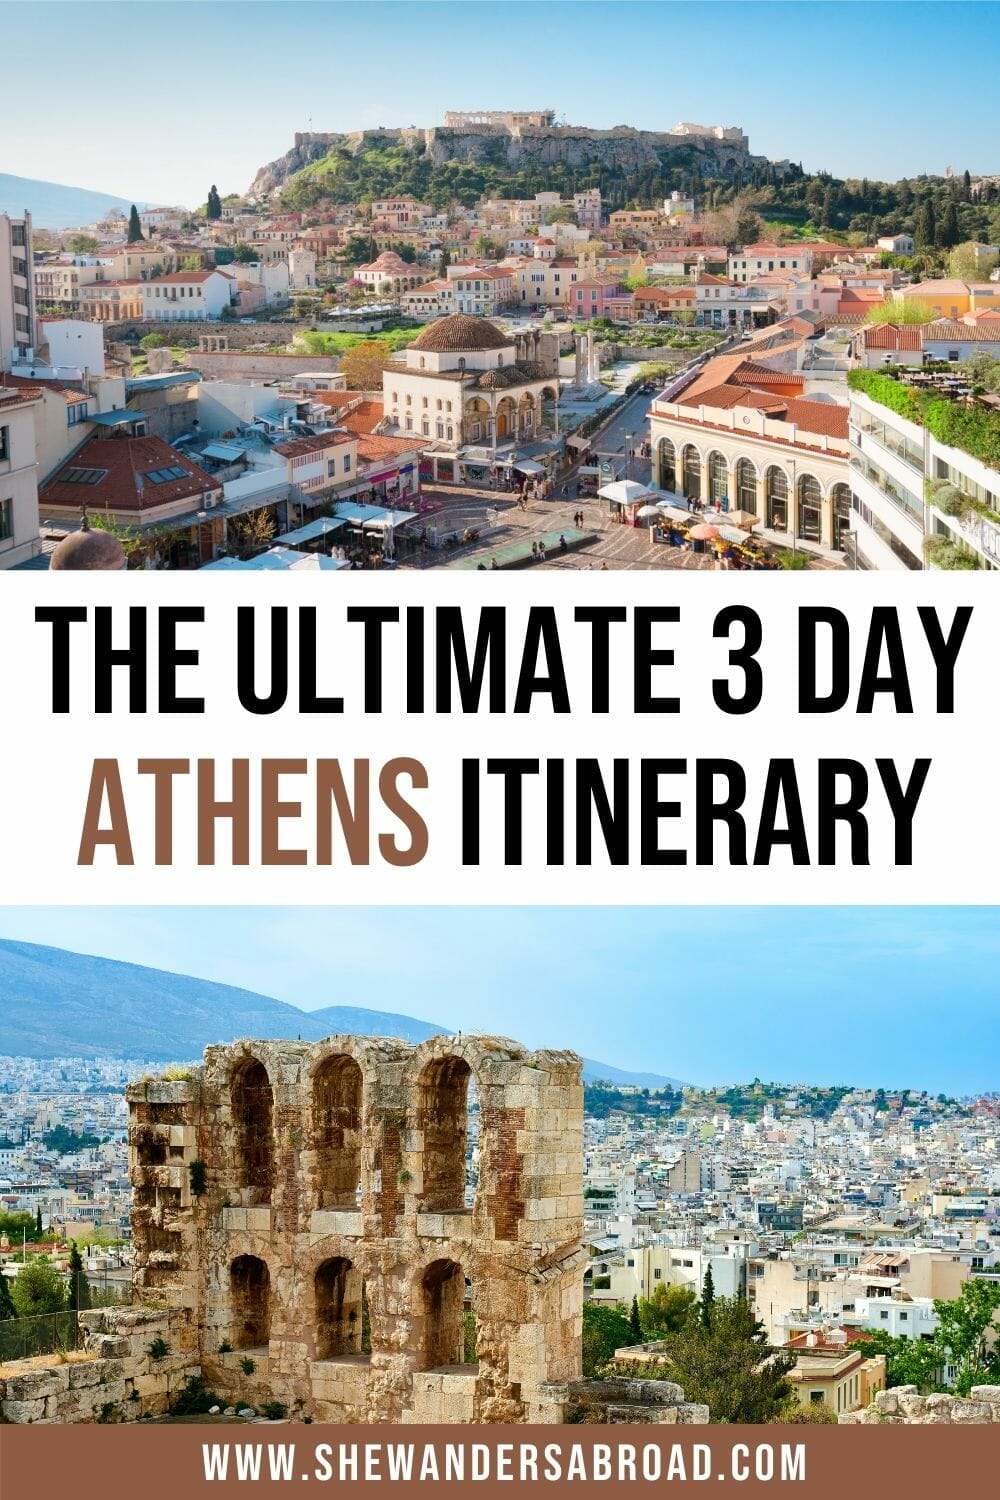 3 Days in Athens, Greece: The Perfect Athens Itinerary